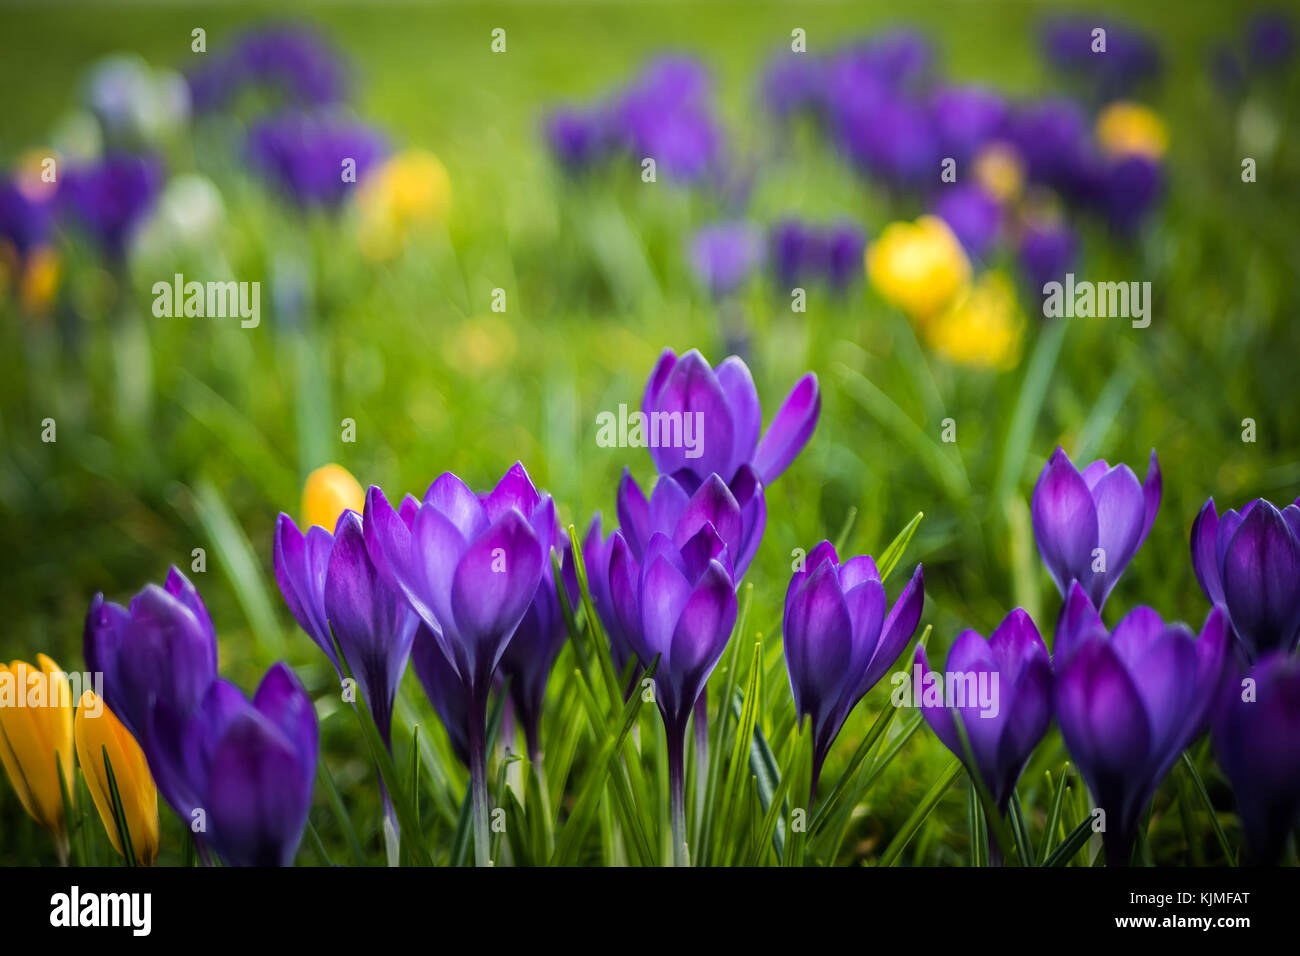 Lots of purple and yellow crocuses in a green grass field Stock Photo